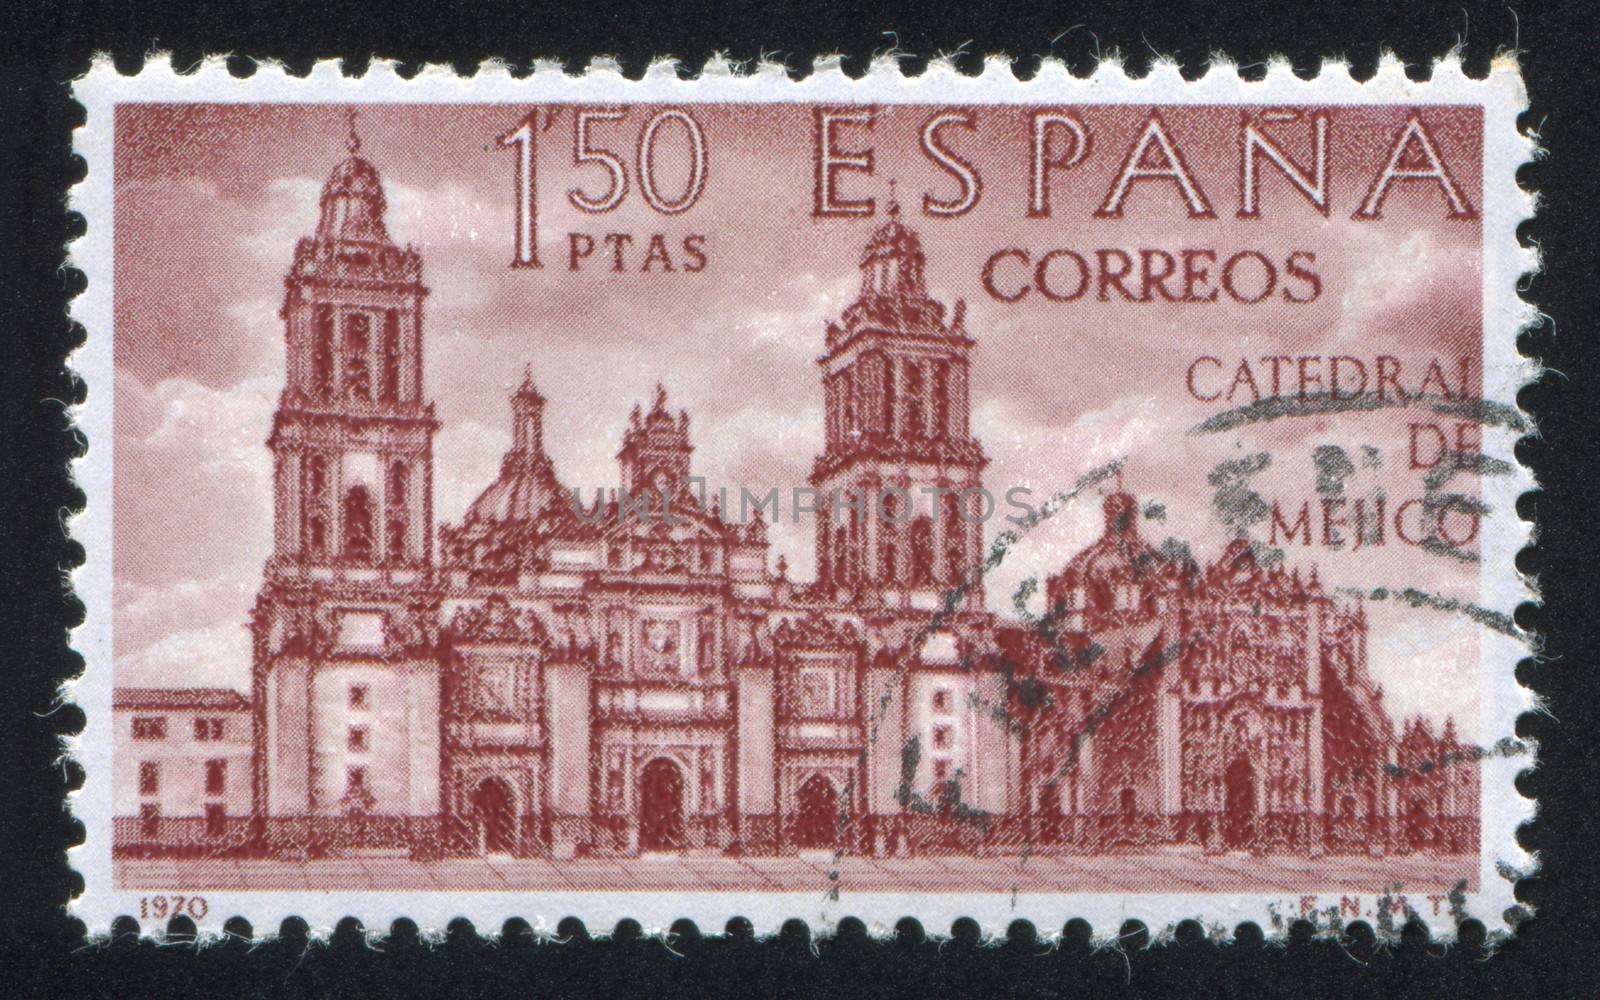 Mexico Cathedral by rook